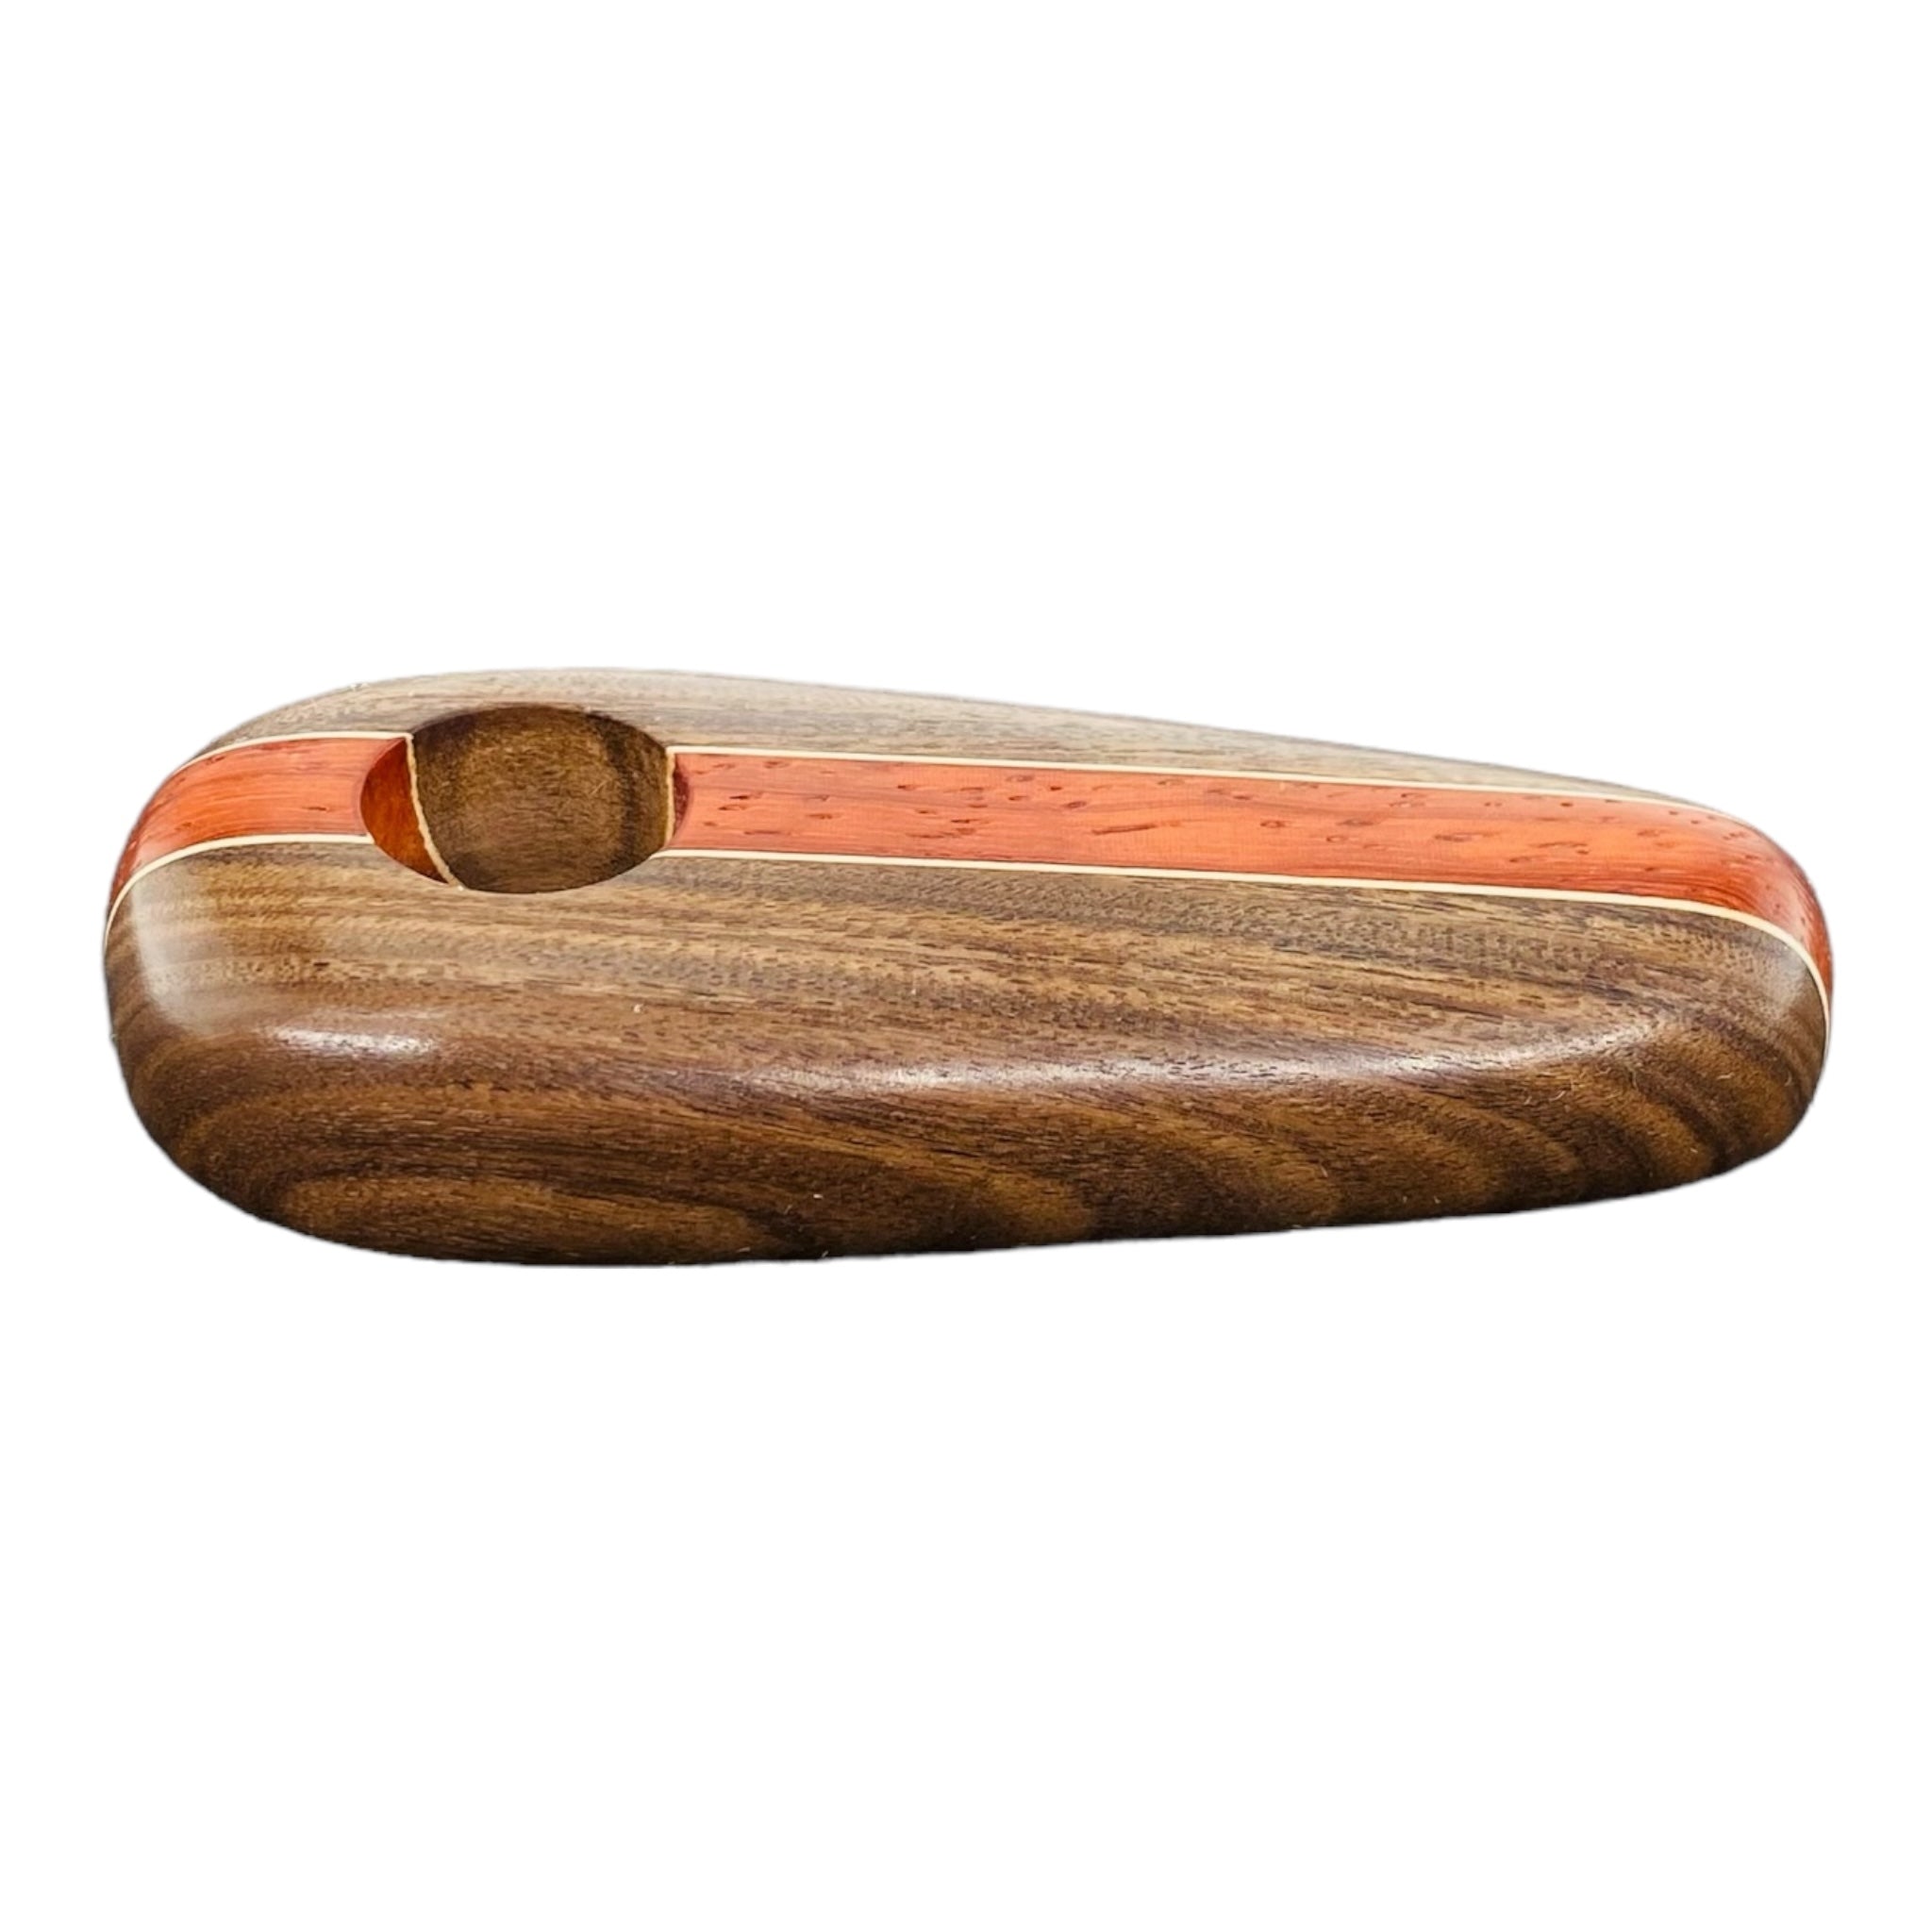 Wood Hand Pipe - Wide Oval Hand Pipe With Two Tone Hardwood